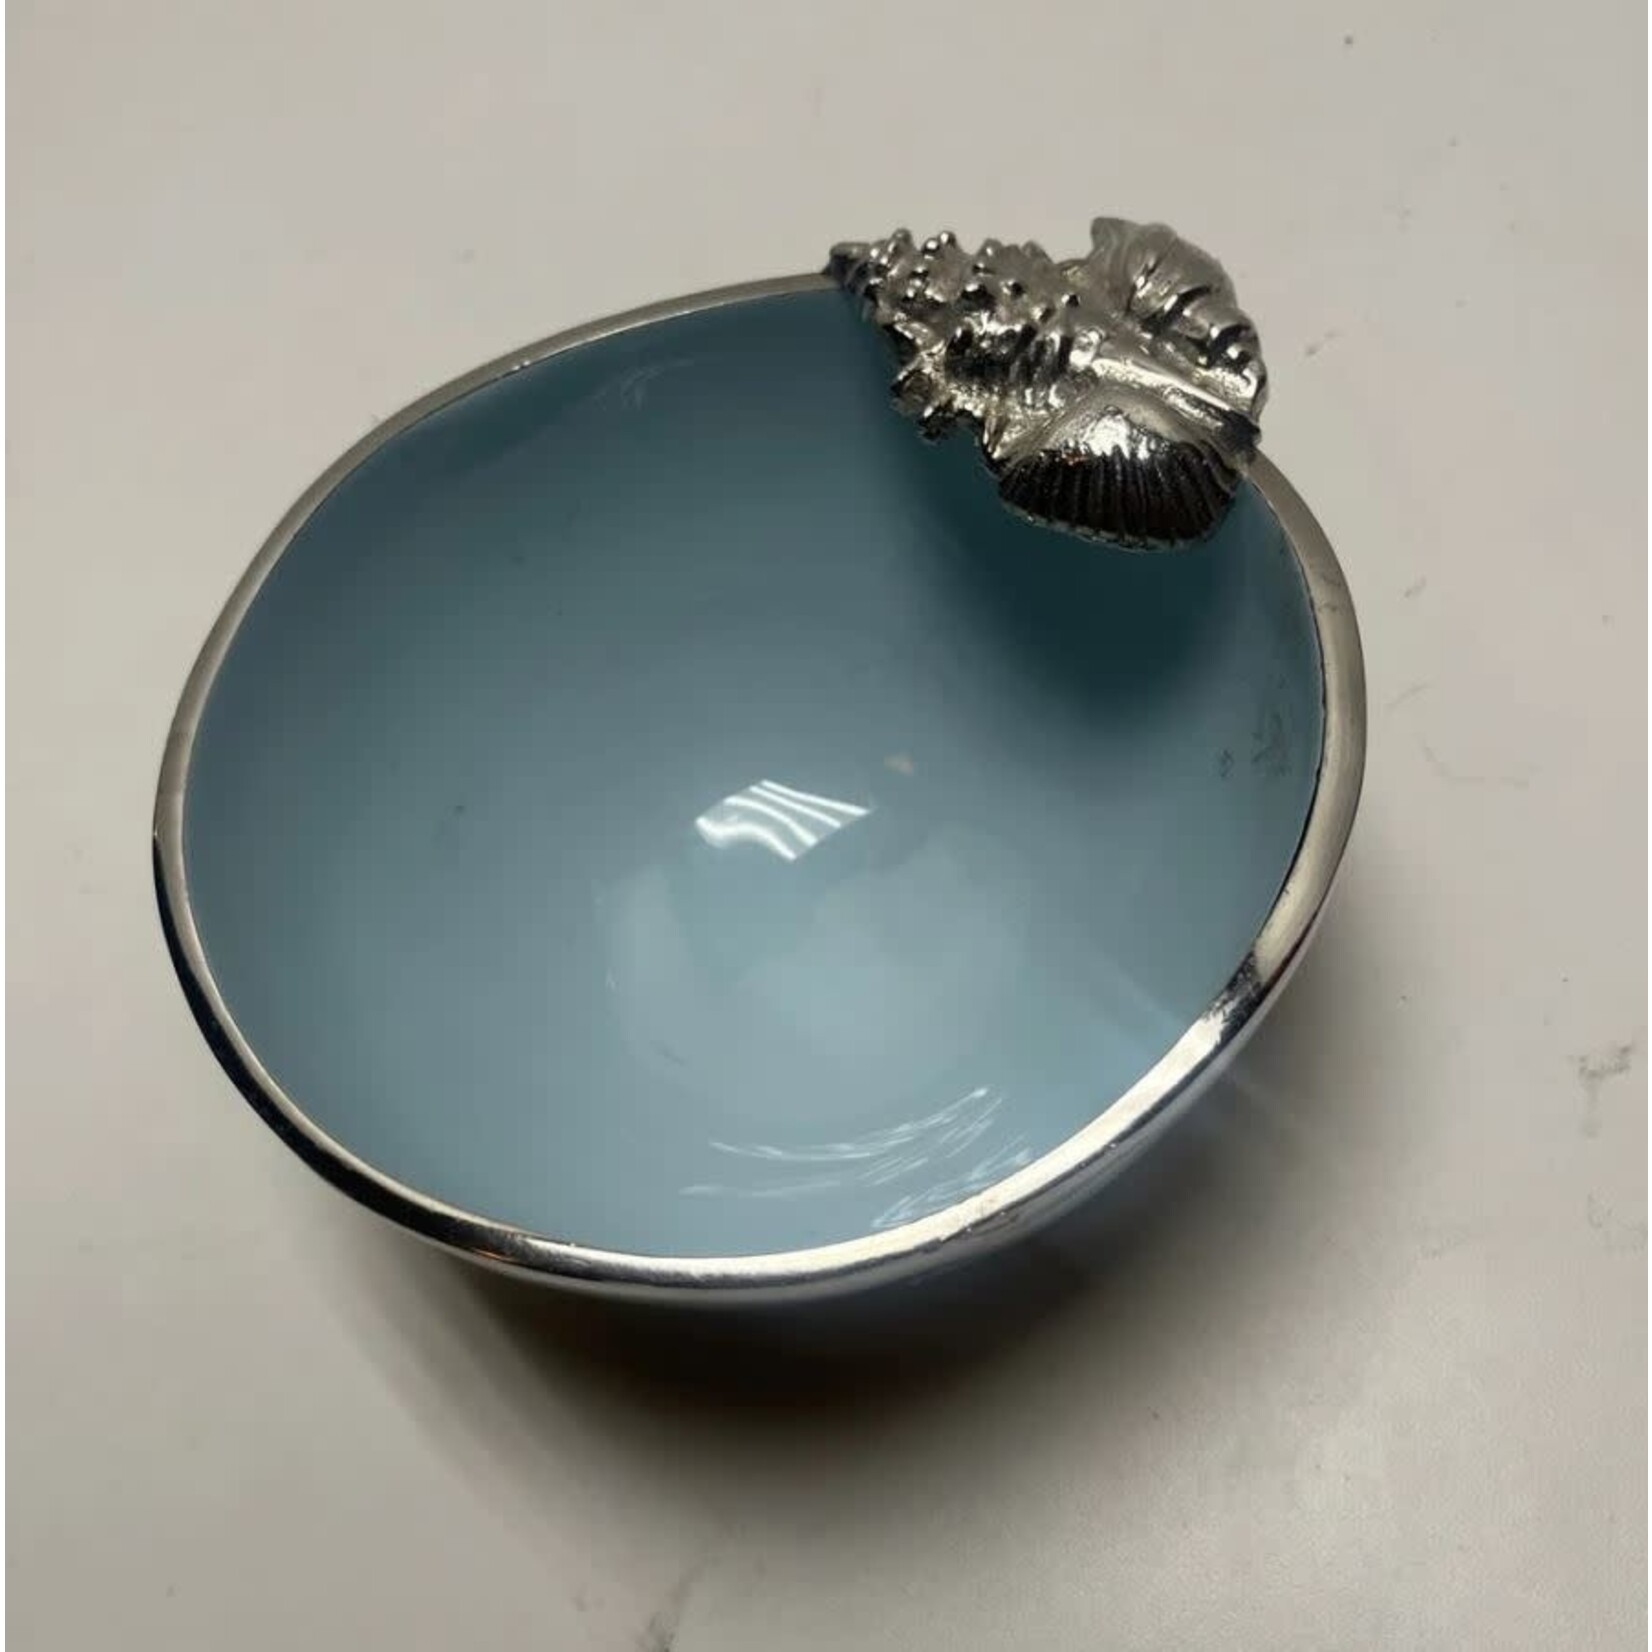 Two's Company Enamel Bowl with Shell